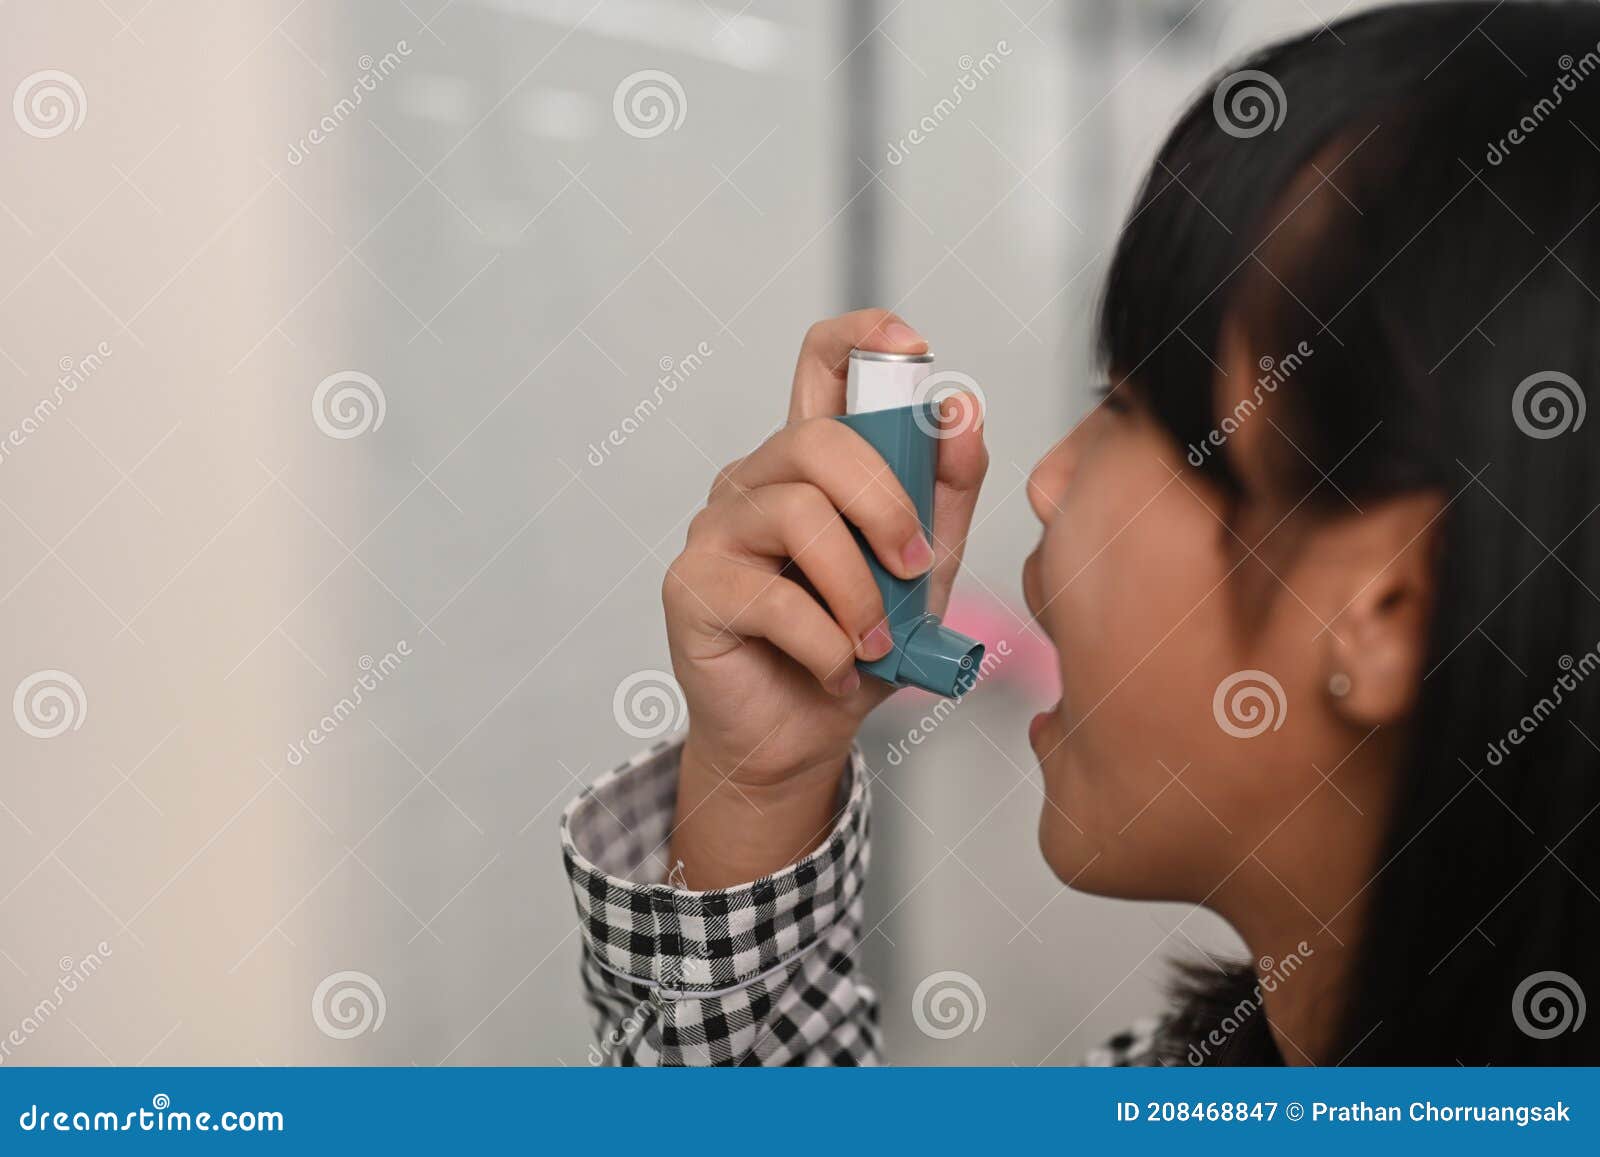 asthmatic young girl using an asthma inhaler while suffering from asthma in toilet.